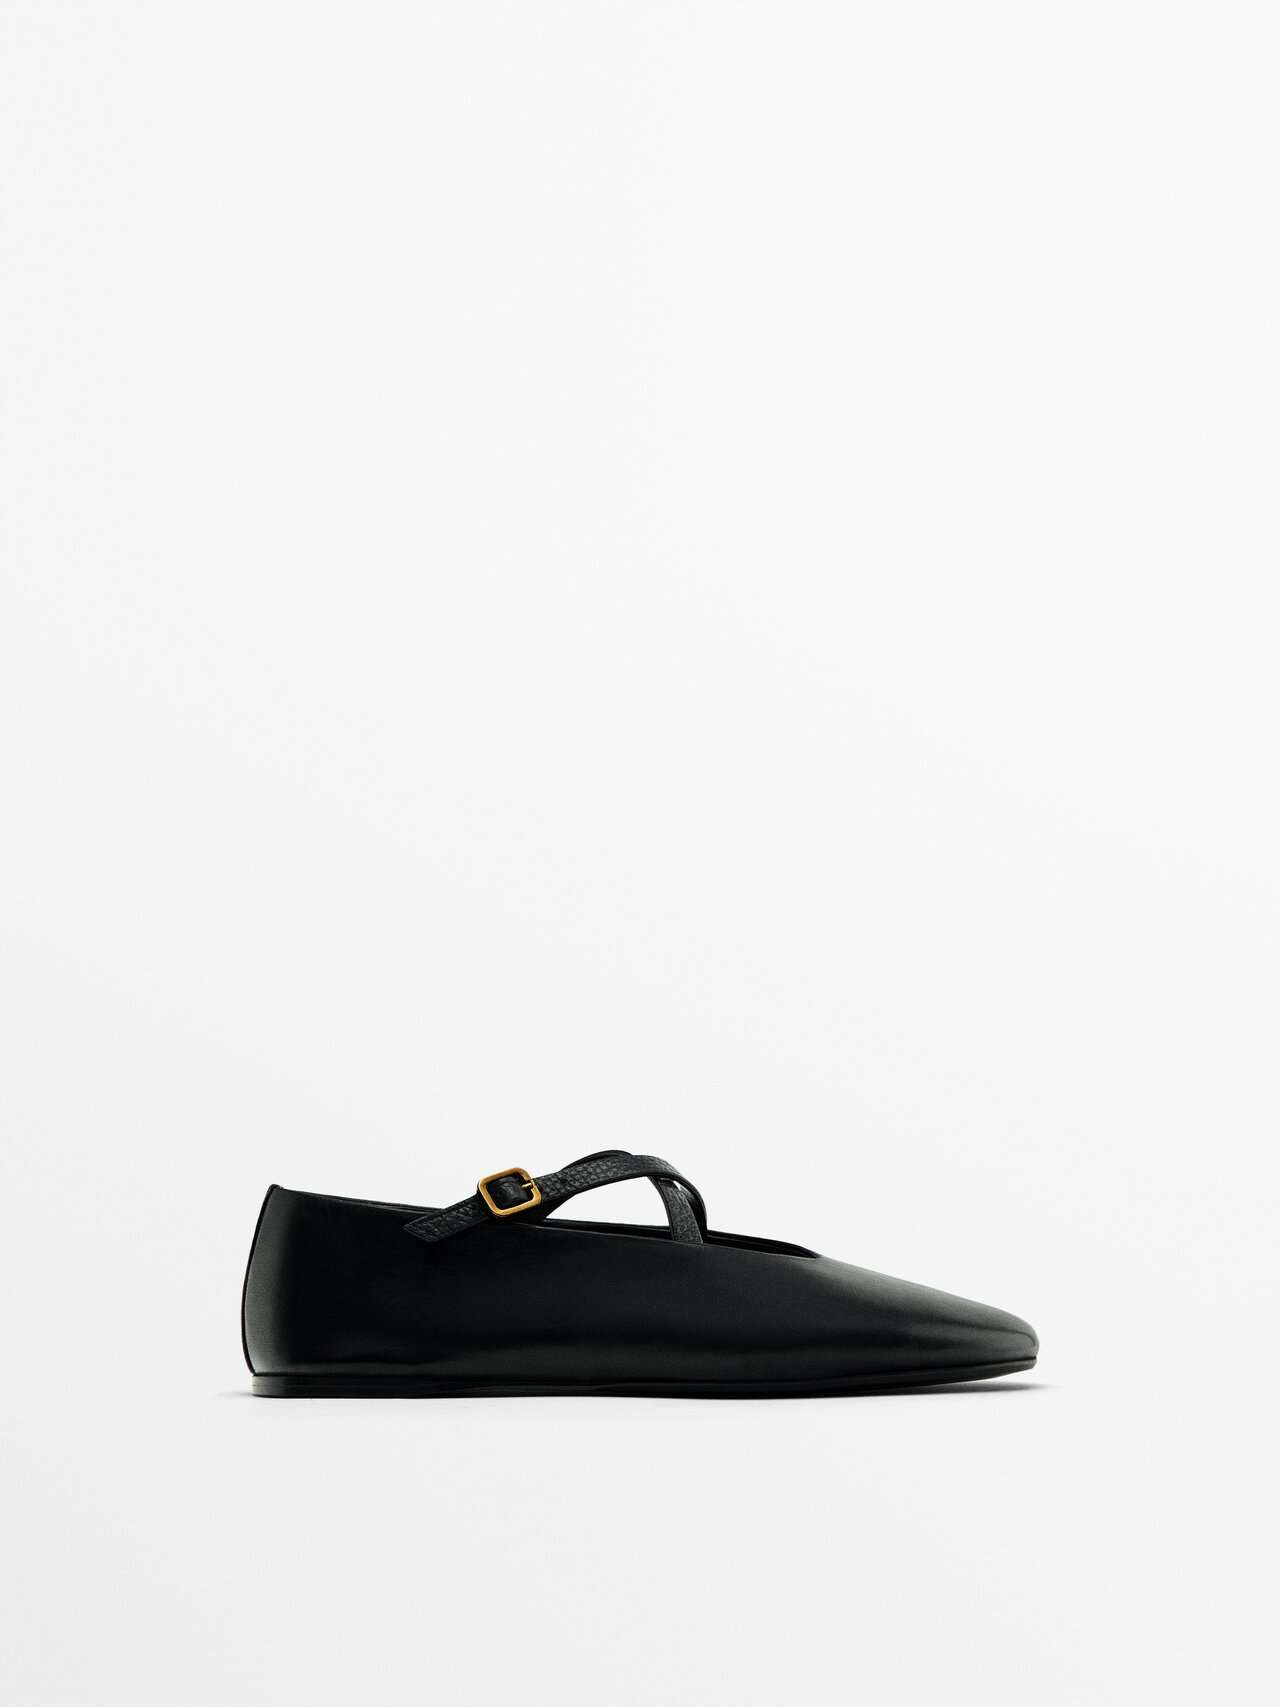 Massimo Dutti Ballet Flats With Crossover Straps In Black